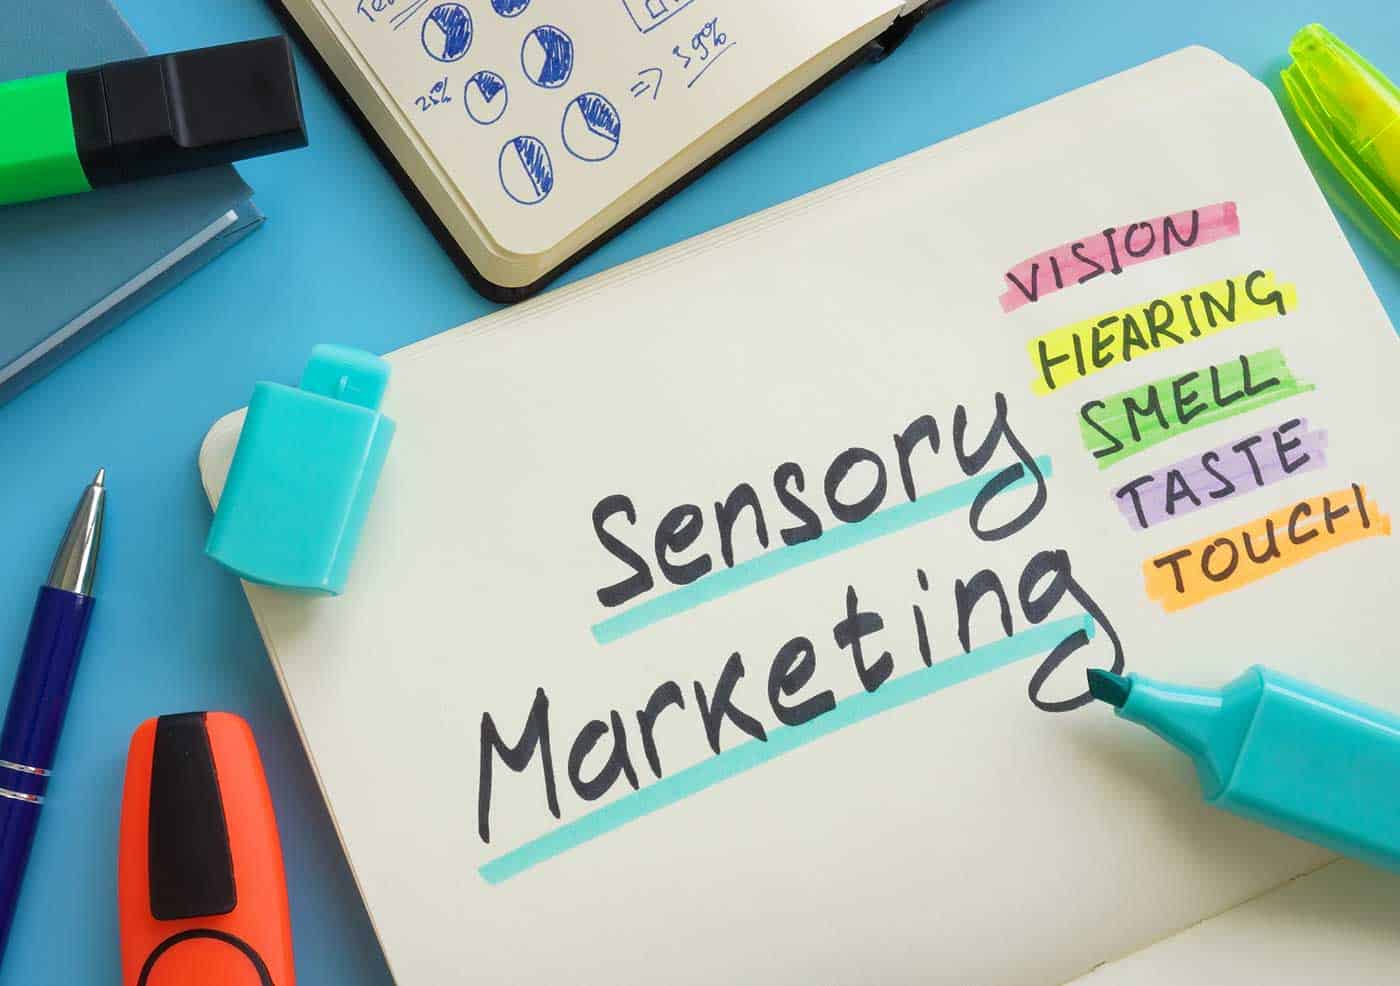 Sensory Marketing vision hearing smell taste touch